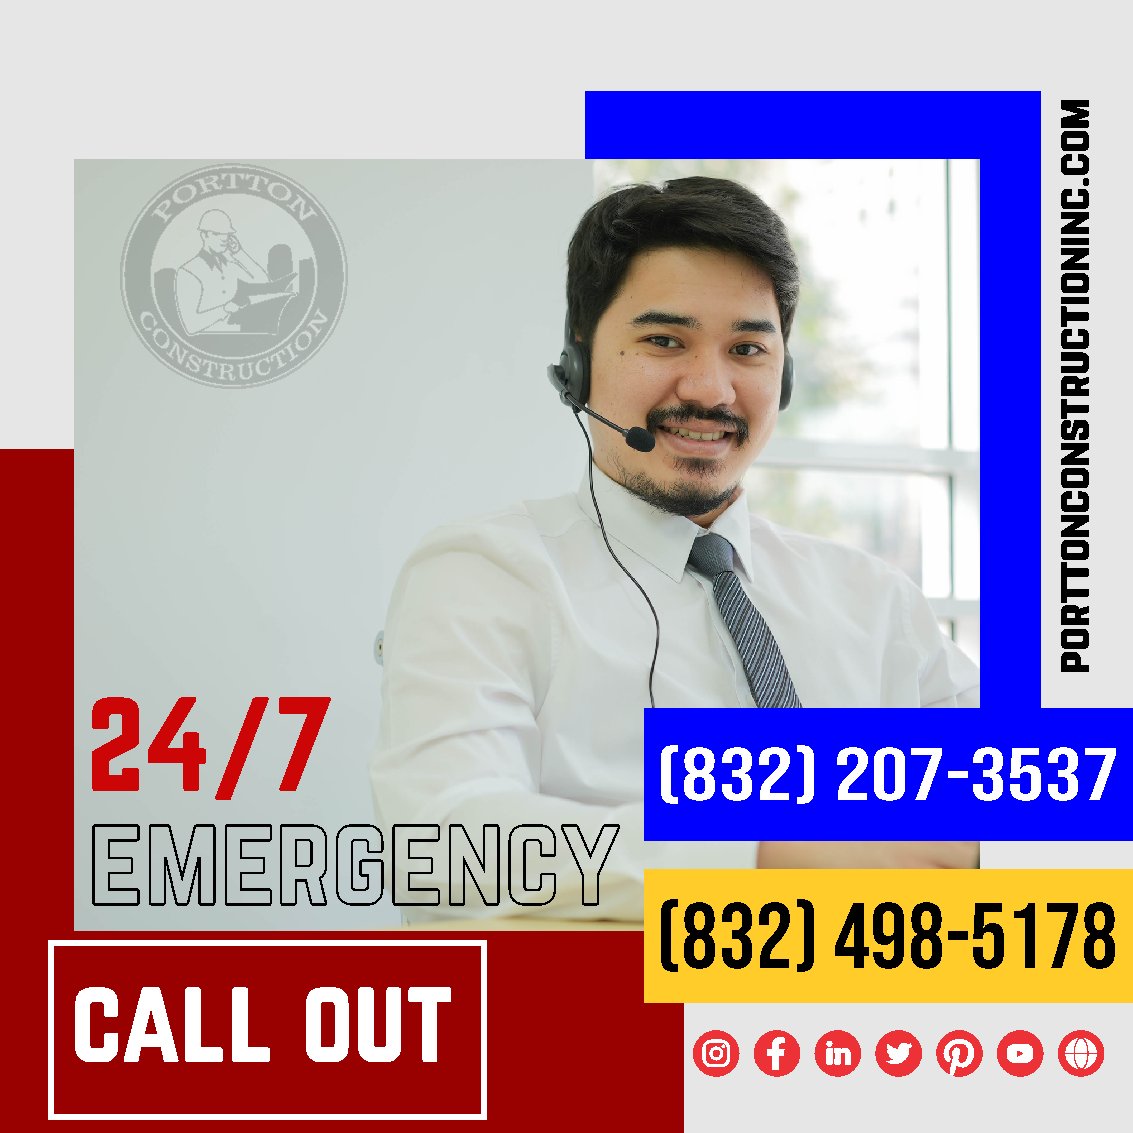 With 24/7 emergency callout services, Portton Construction Inc. ensures that their customers are always taken care of whenever they need help.
#PorttonConstructionInc #EmergencyCalloutServices #ConstructionAssistance #CustomerCare #AlwaysThereForYou #HelpWhenYouNeedIt #Reliab ...